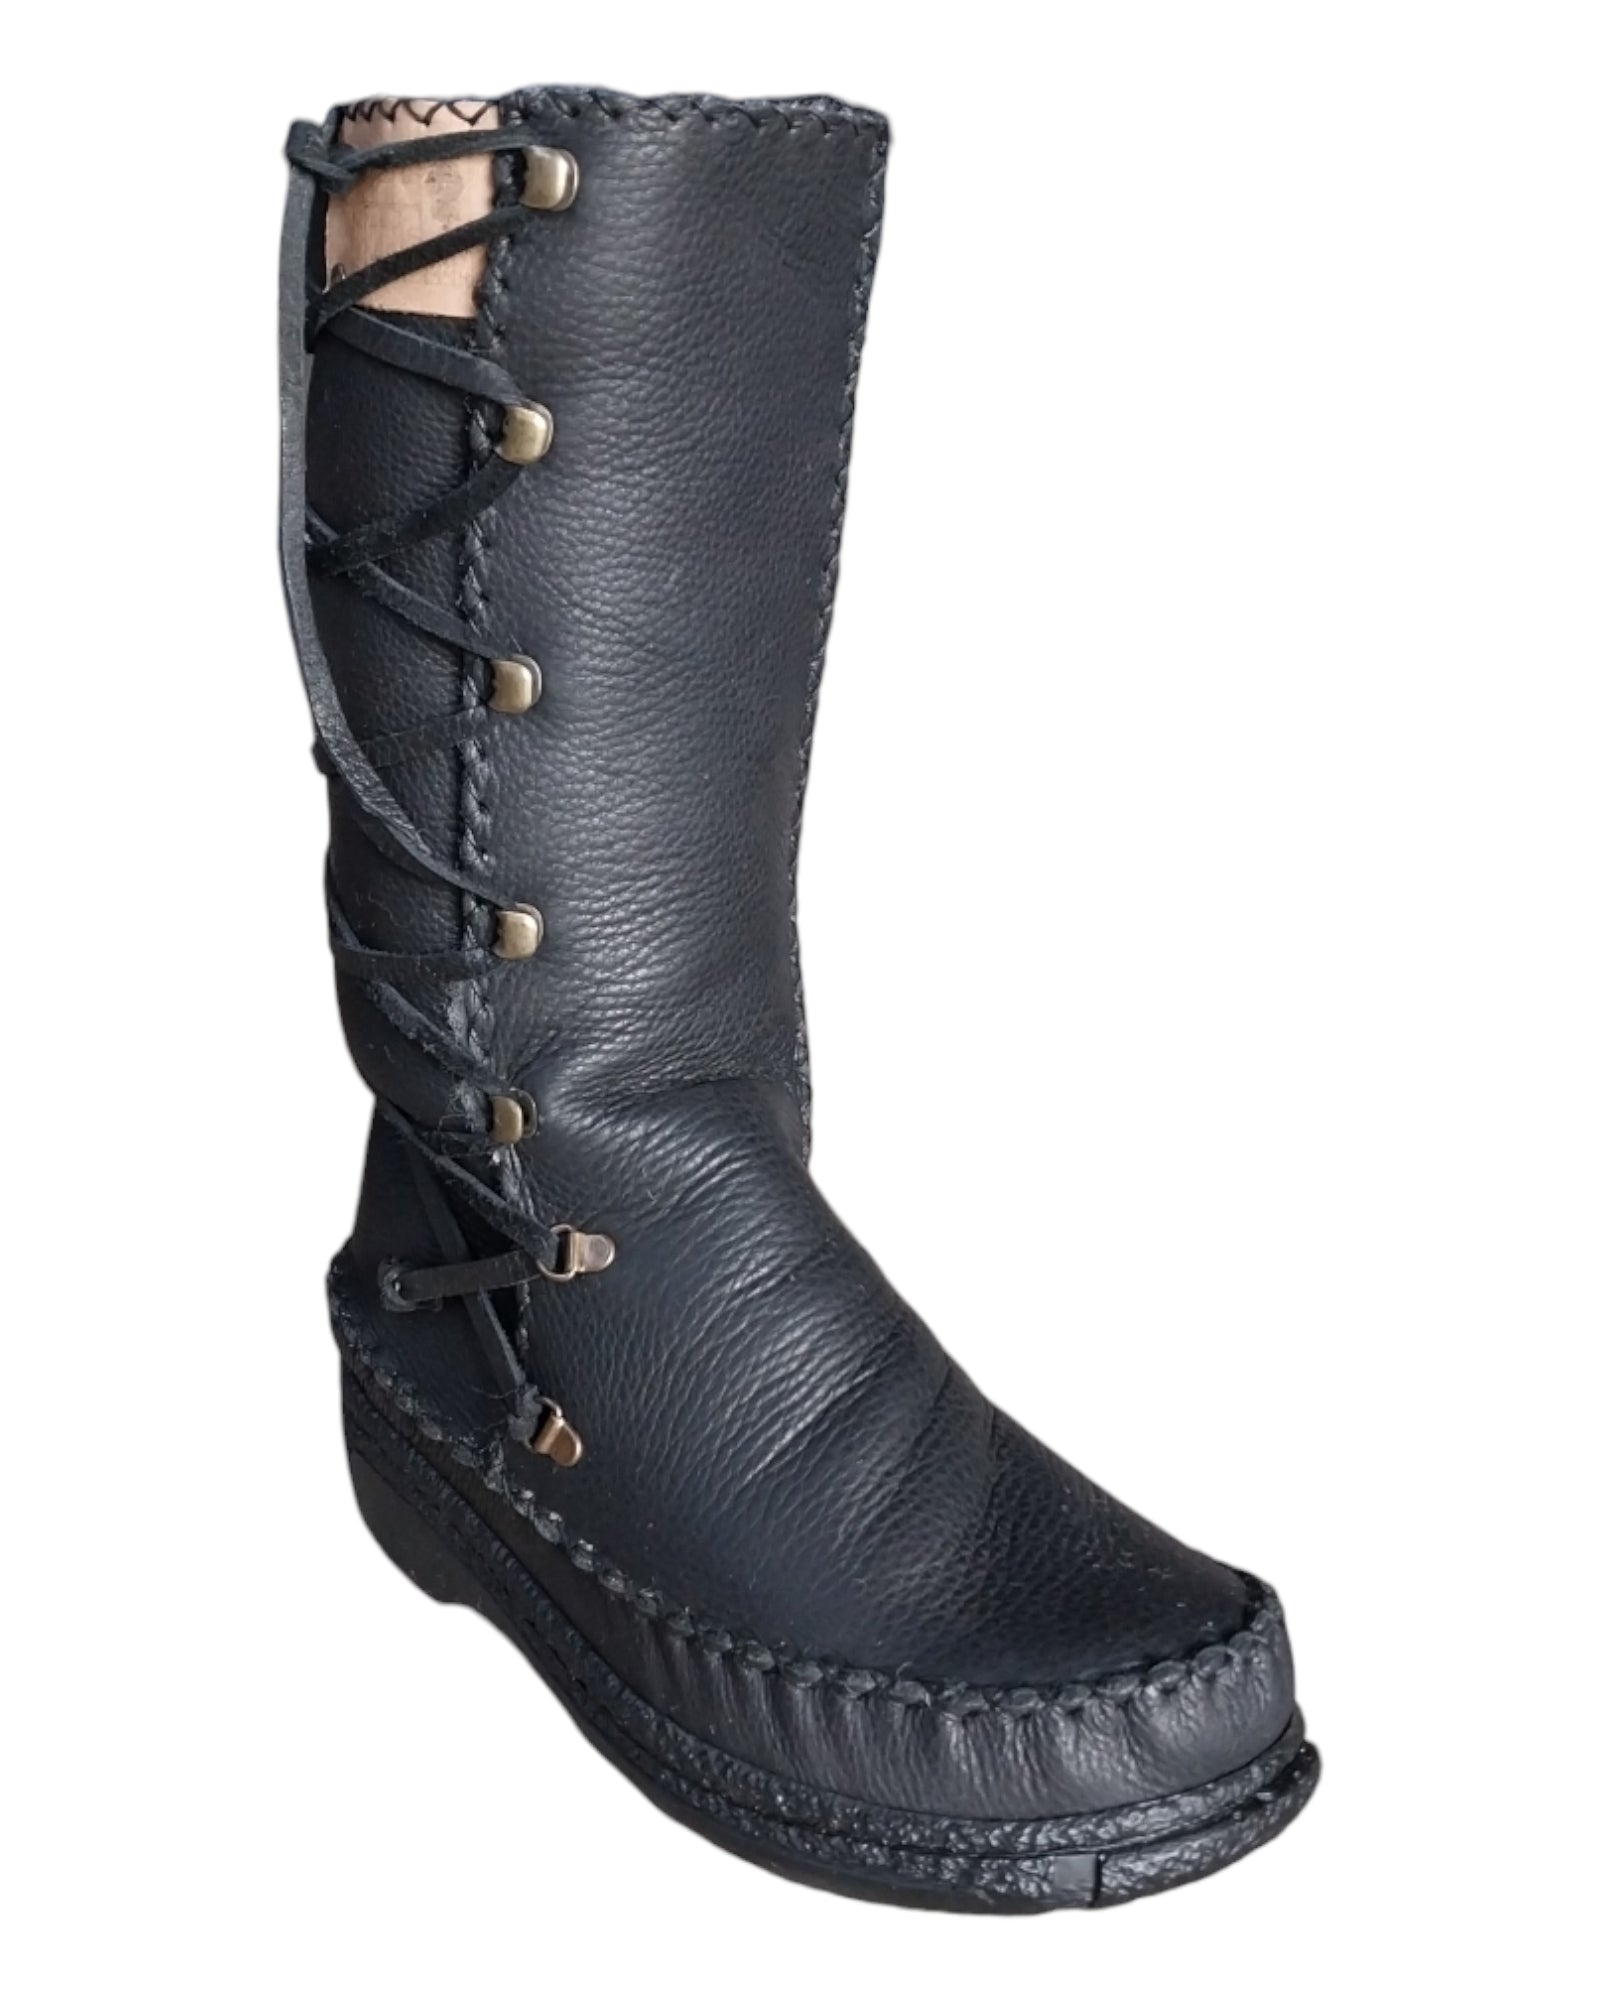 High Leather Boots with Side Laces (UK 7)